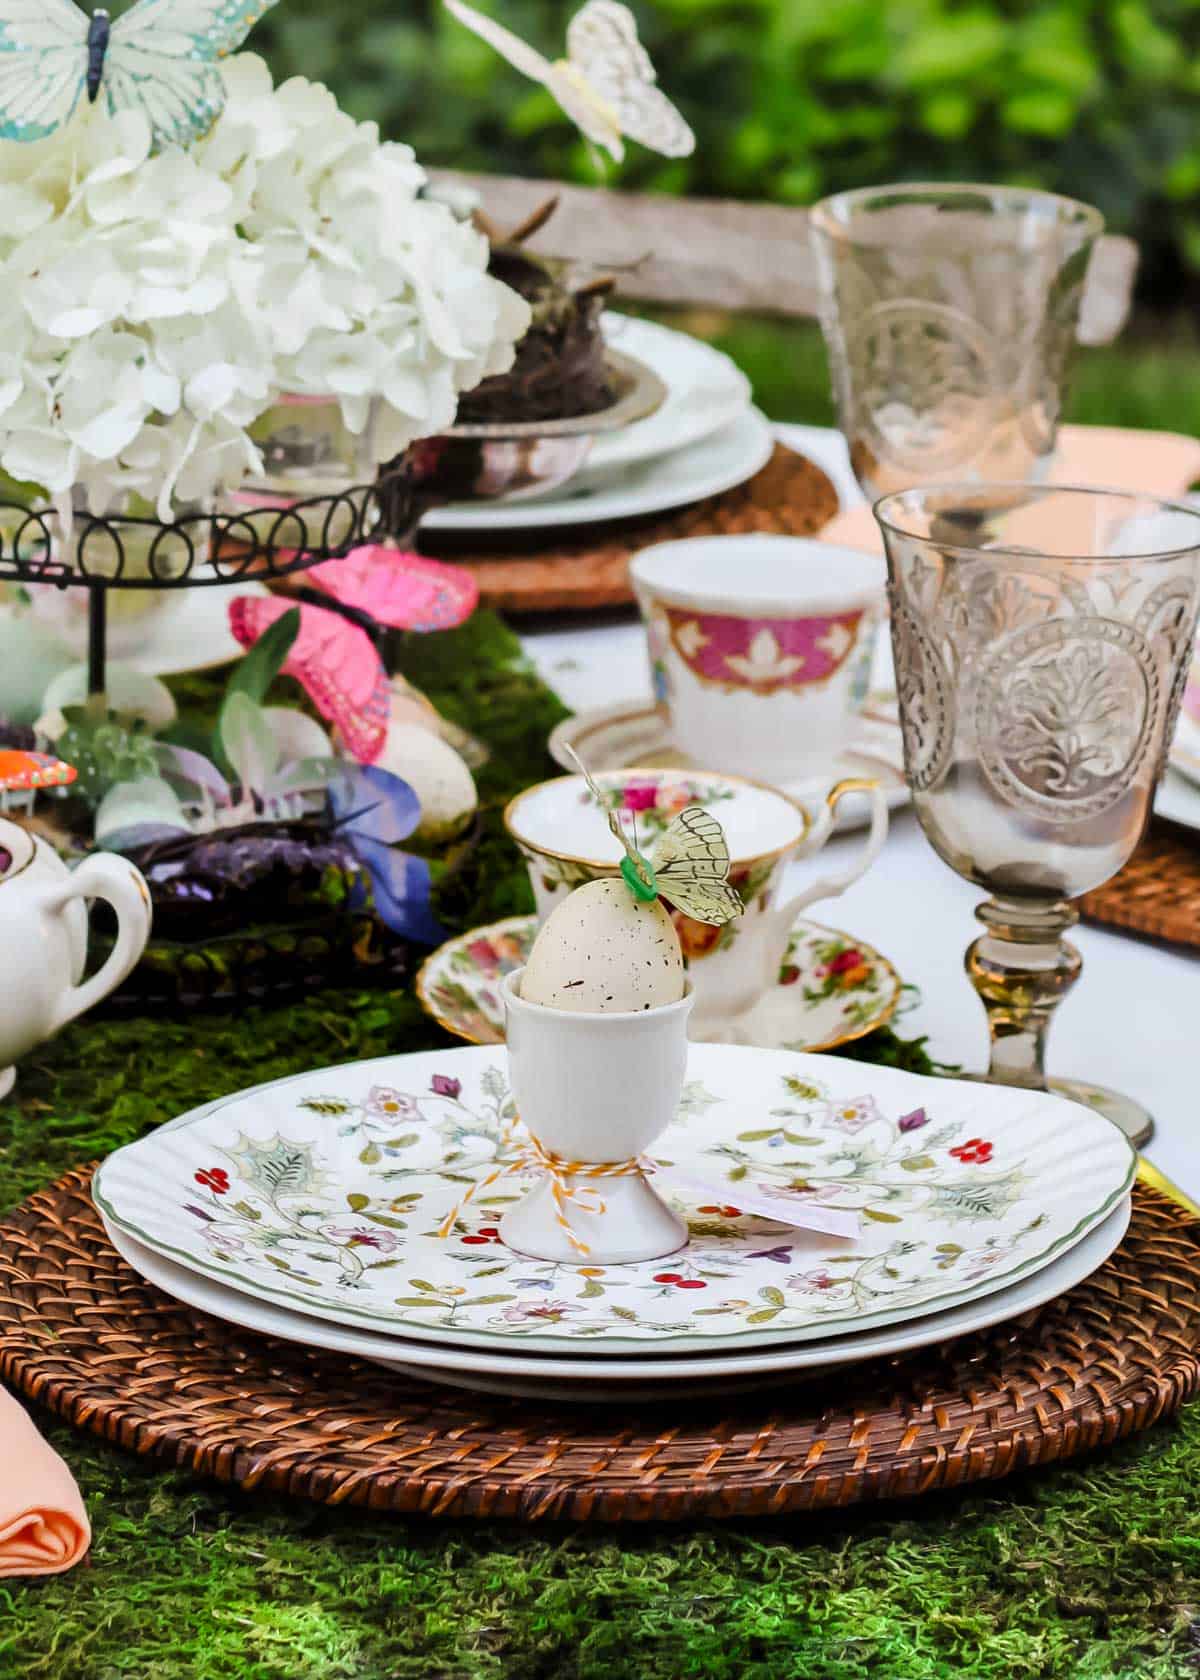 Easter table outside with vintage dishes, egg cups, and moss runner.